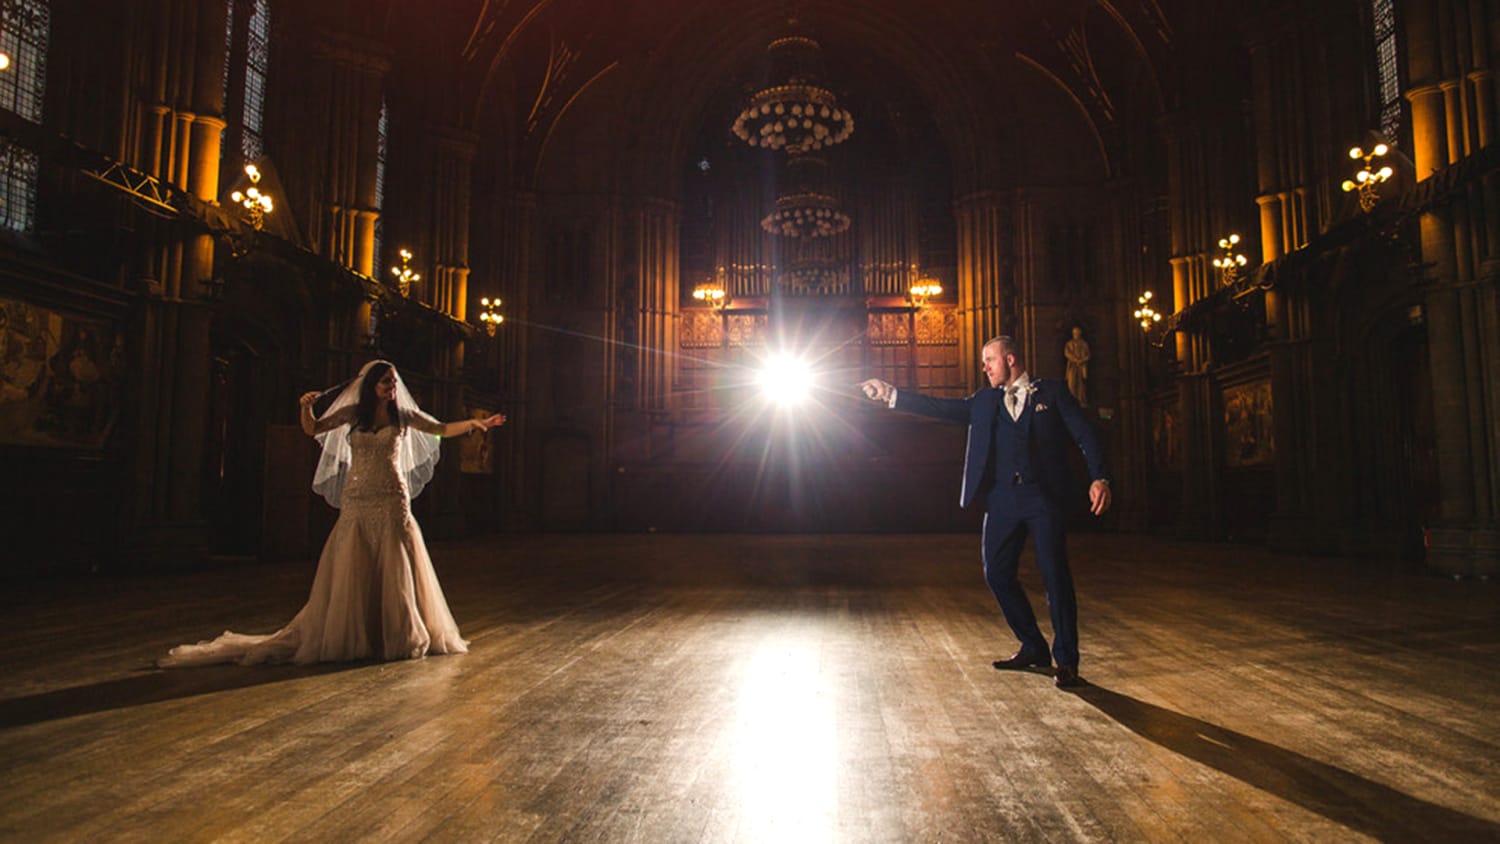 Harry Potter'-themed wedding charms fans and skeptics with magical